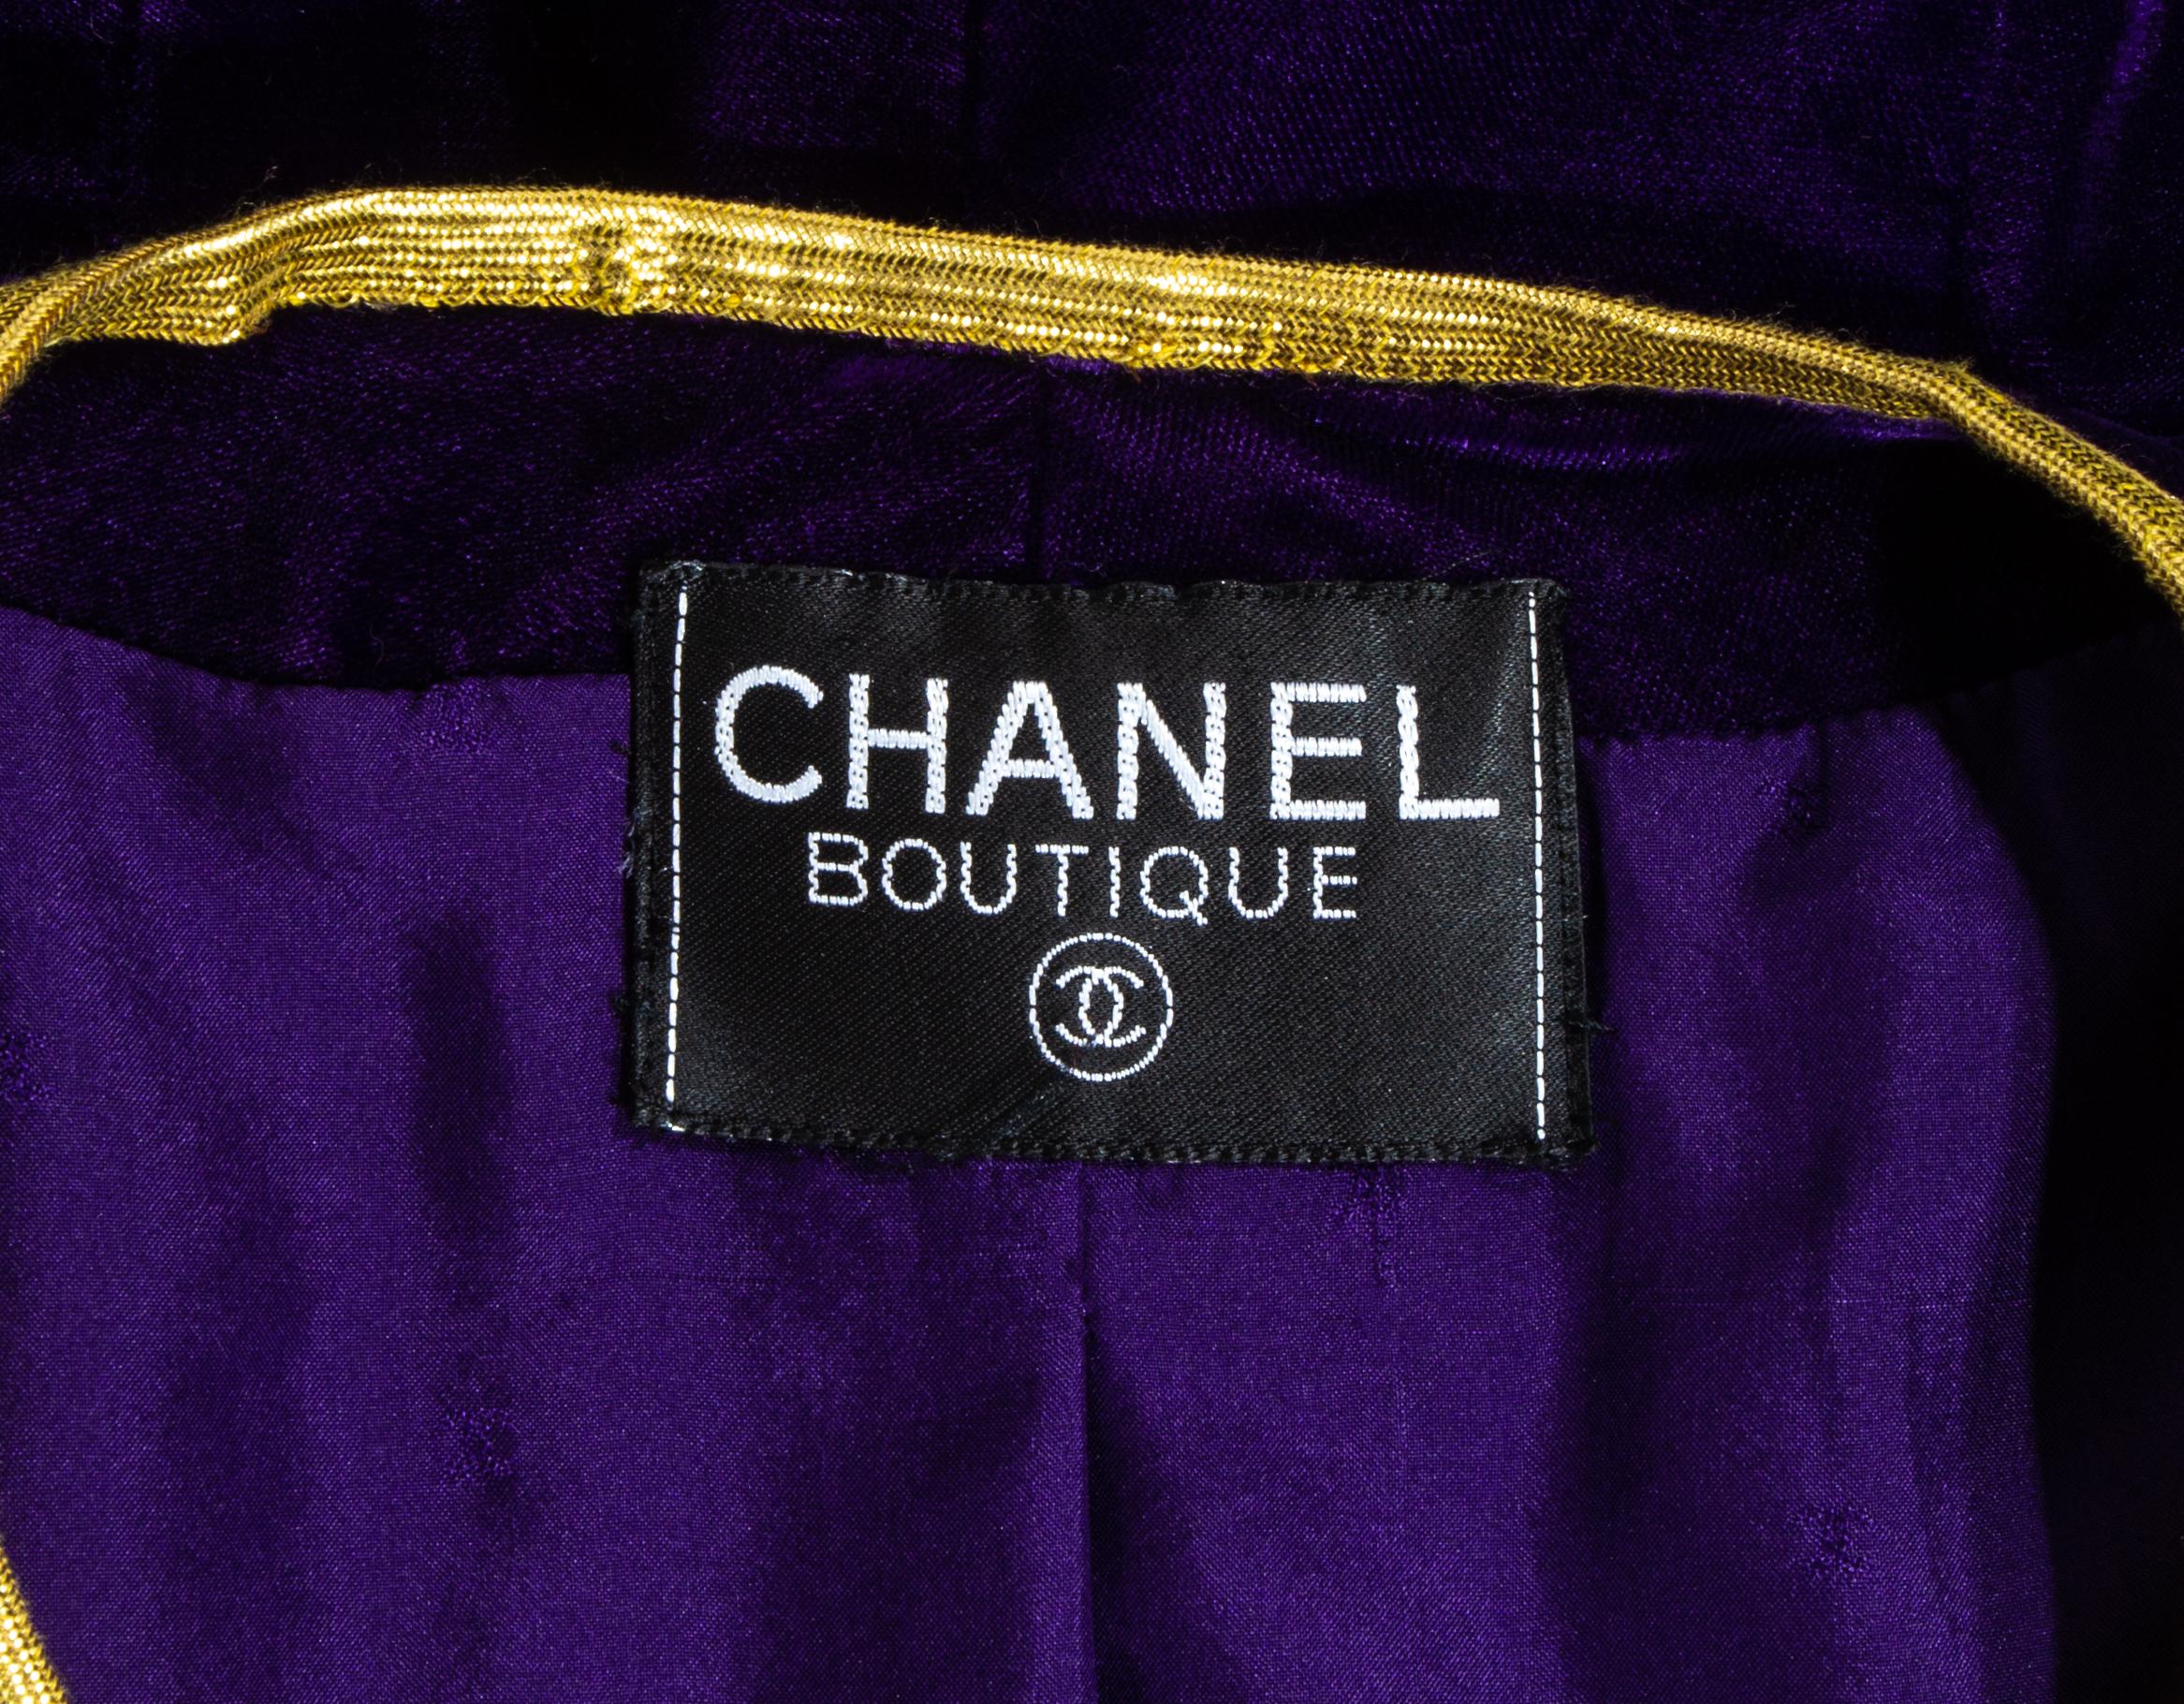 Chanel by Karl Lagerfeld purple velvet pant suit with gold trim, fw 1993 For Sale 2